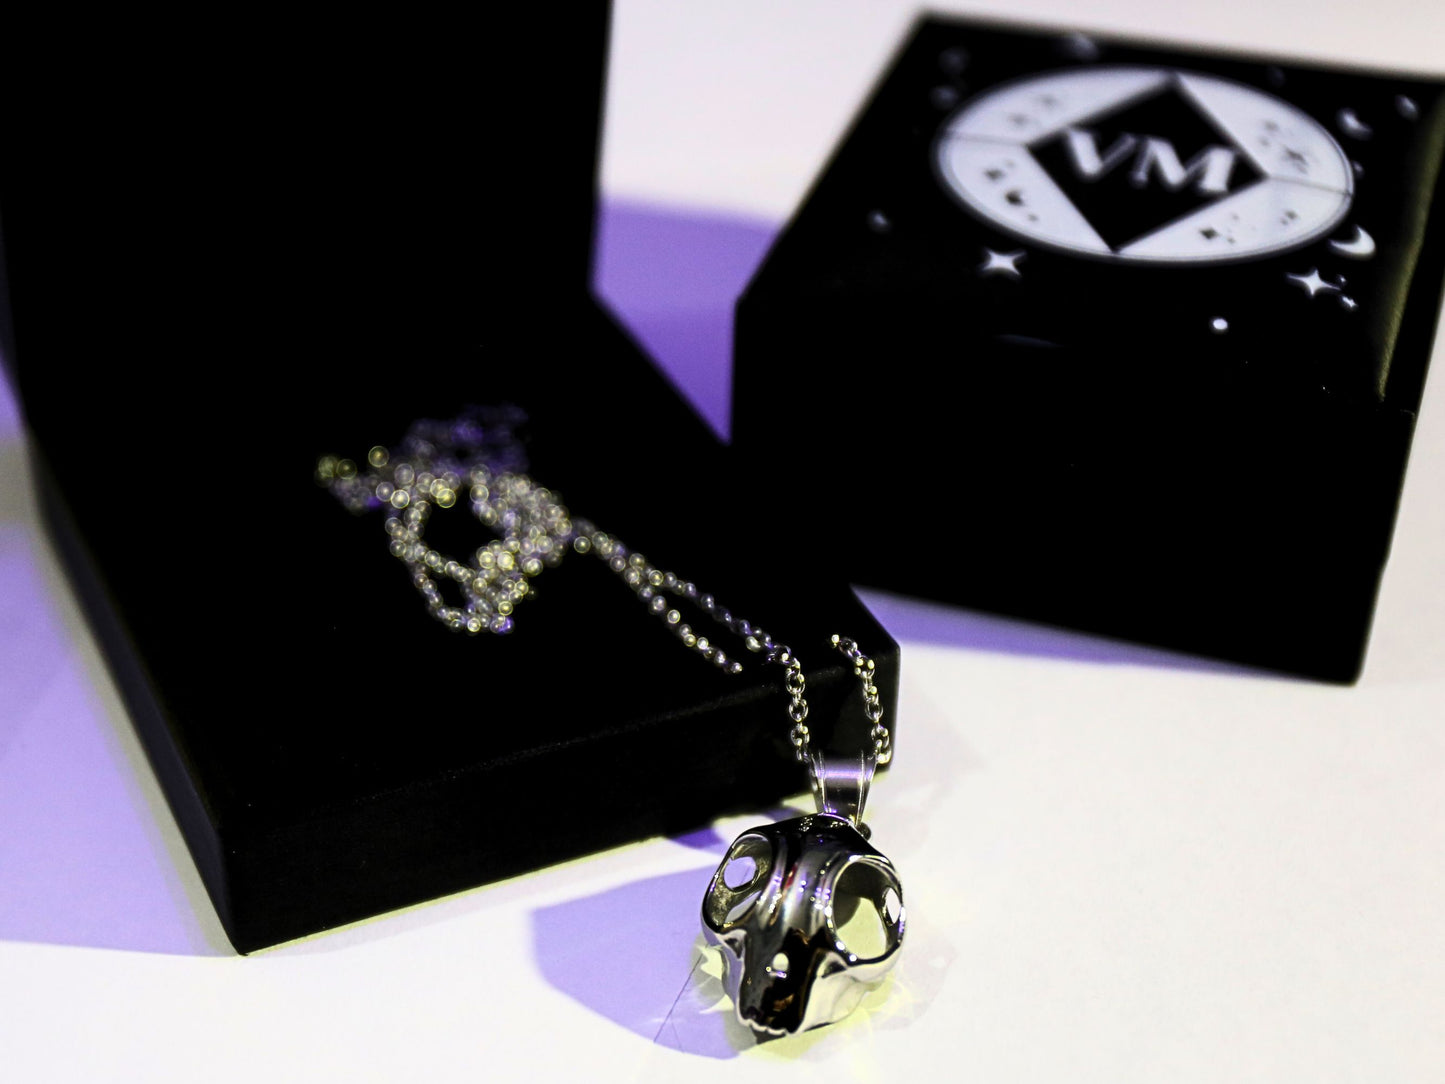 The VM Gothic Cat Skull Necklace - Stainless Steel